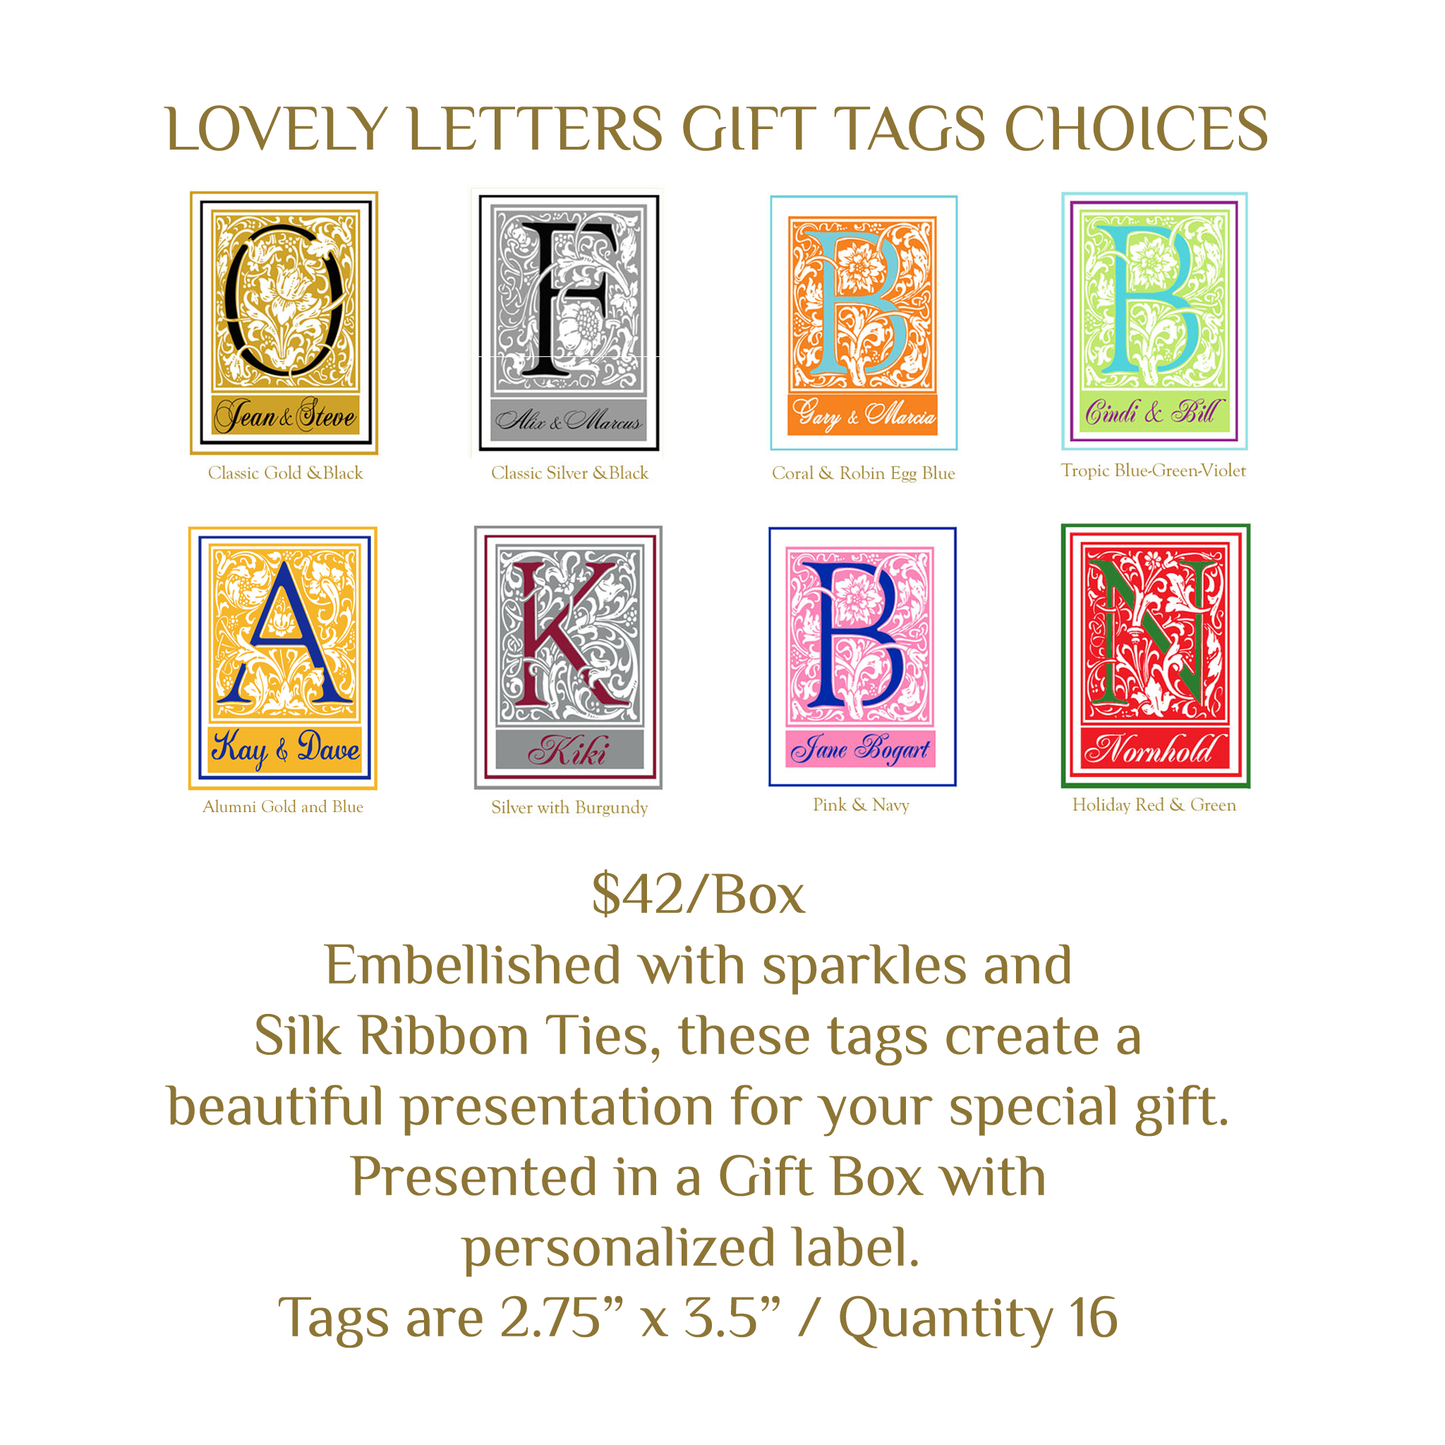 Lovely Letters Gift Tags